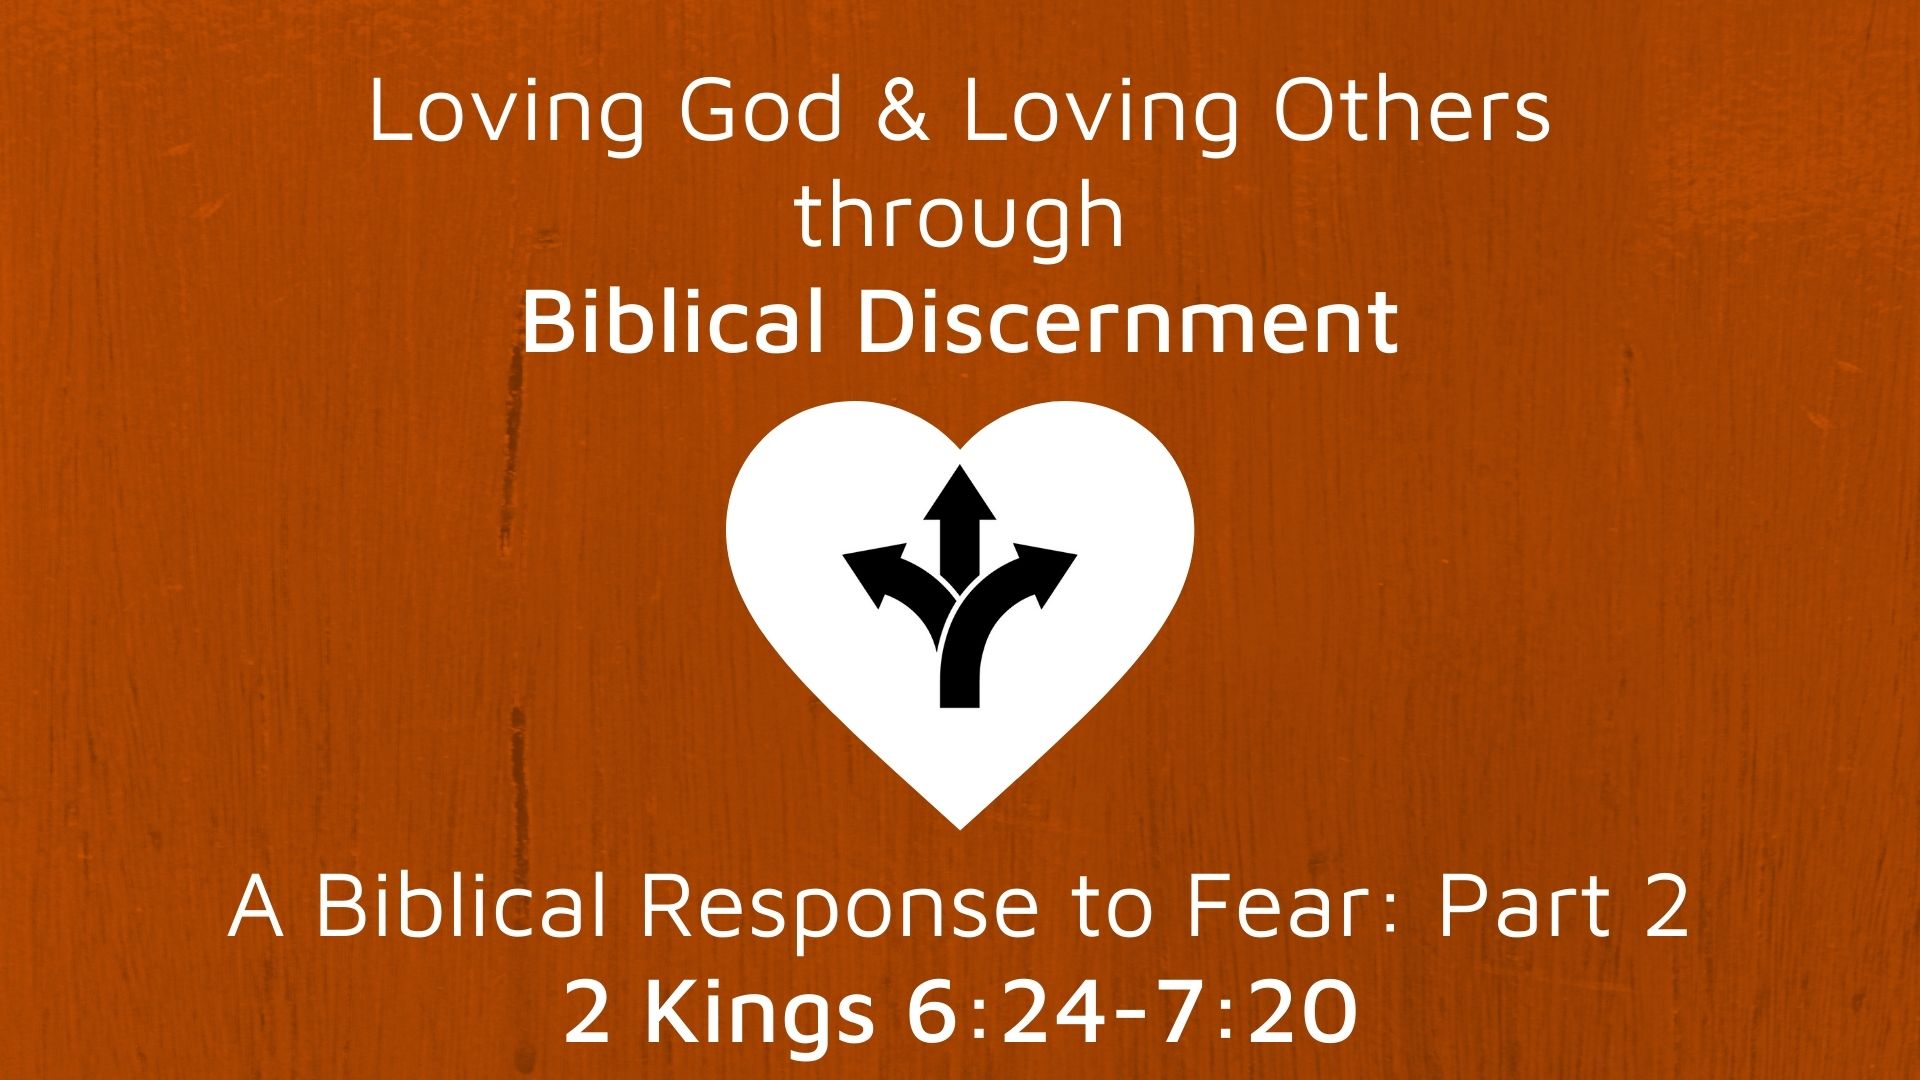 A Biblical Response to Fear - Part 2 (2 Kings 6:24-7:20)